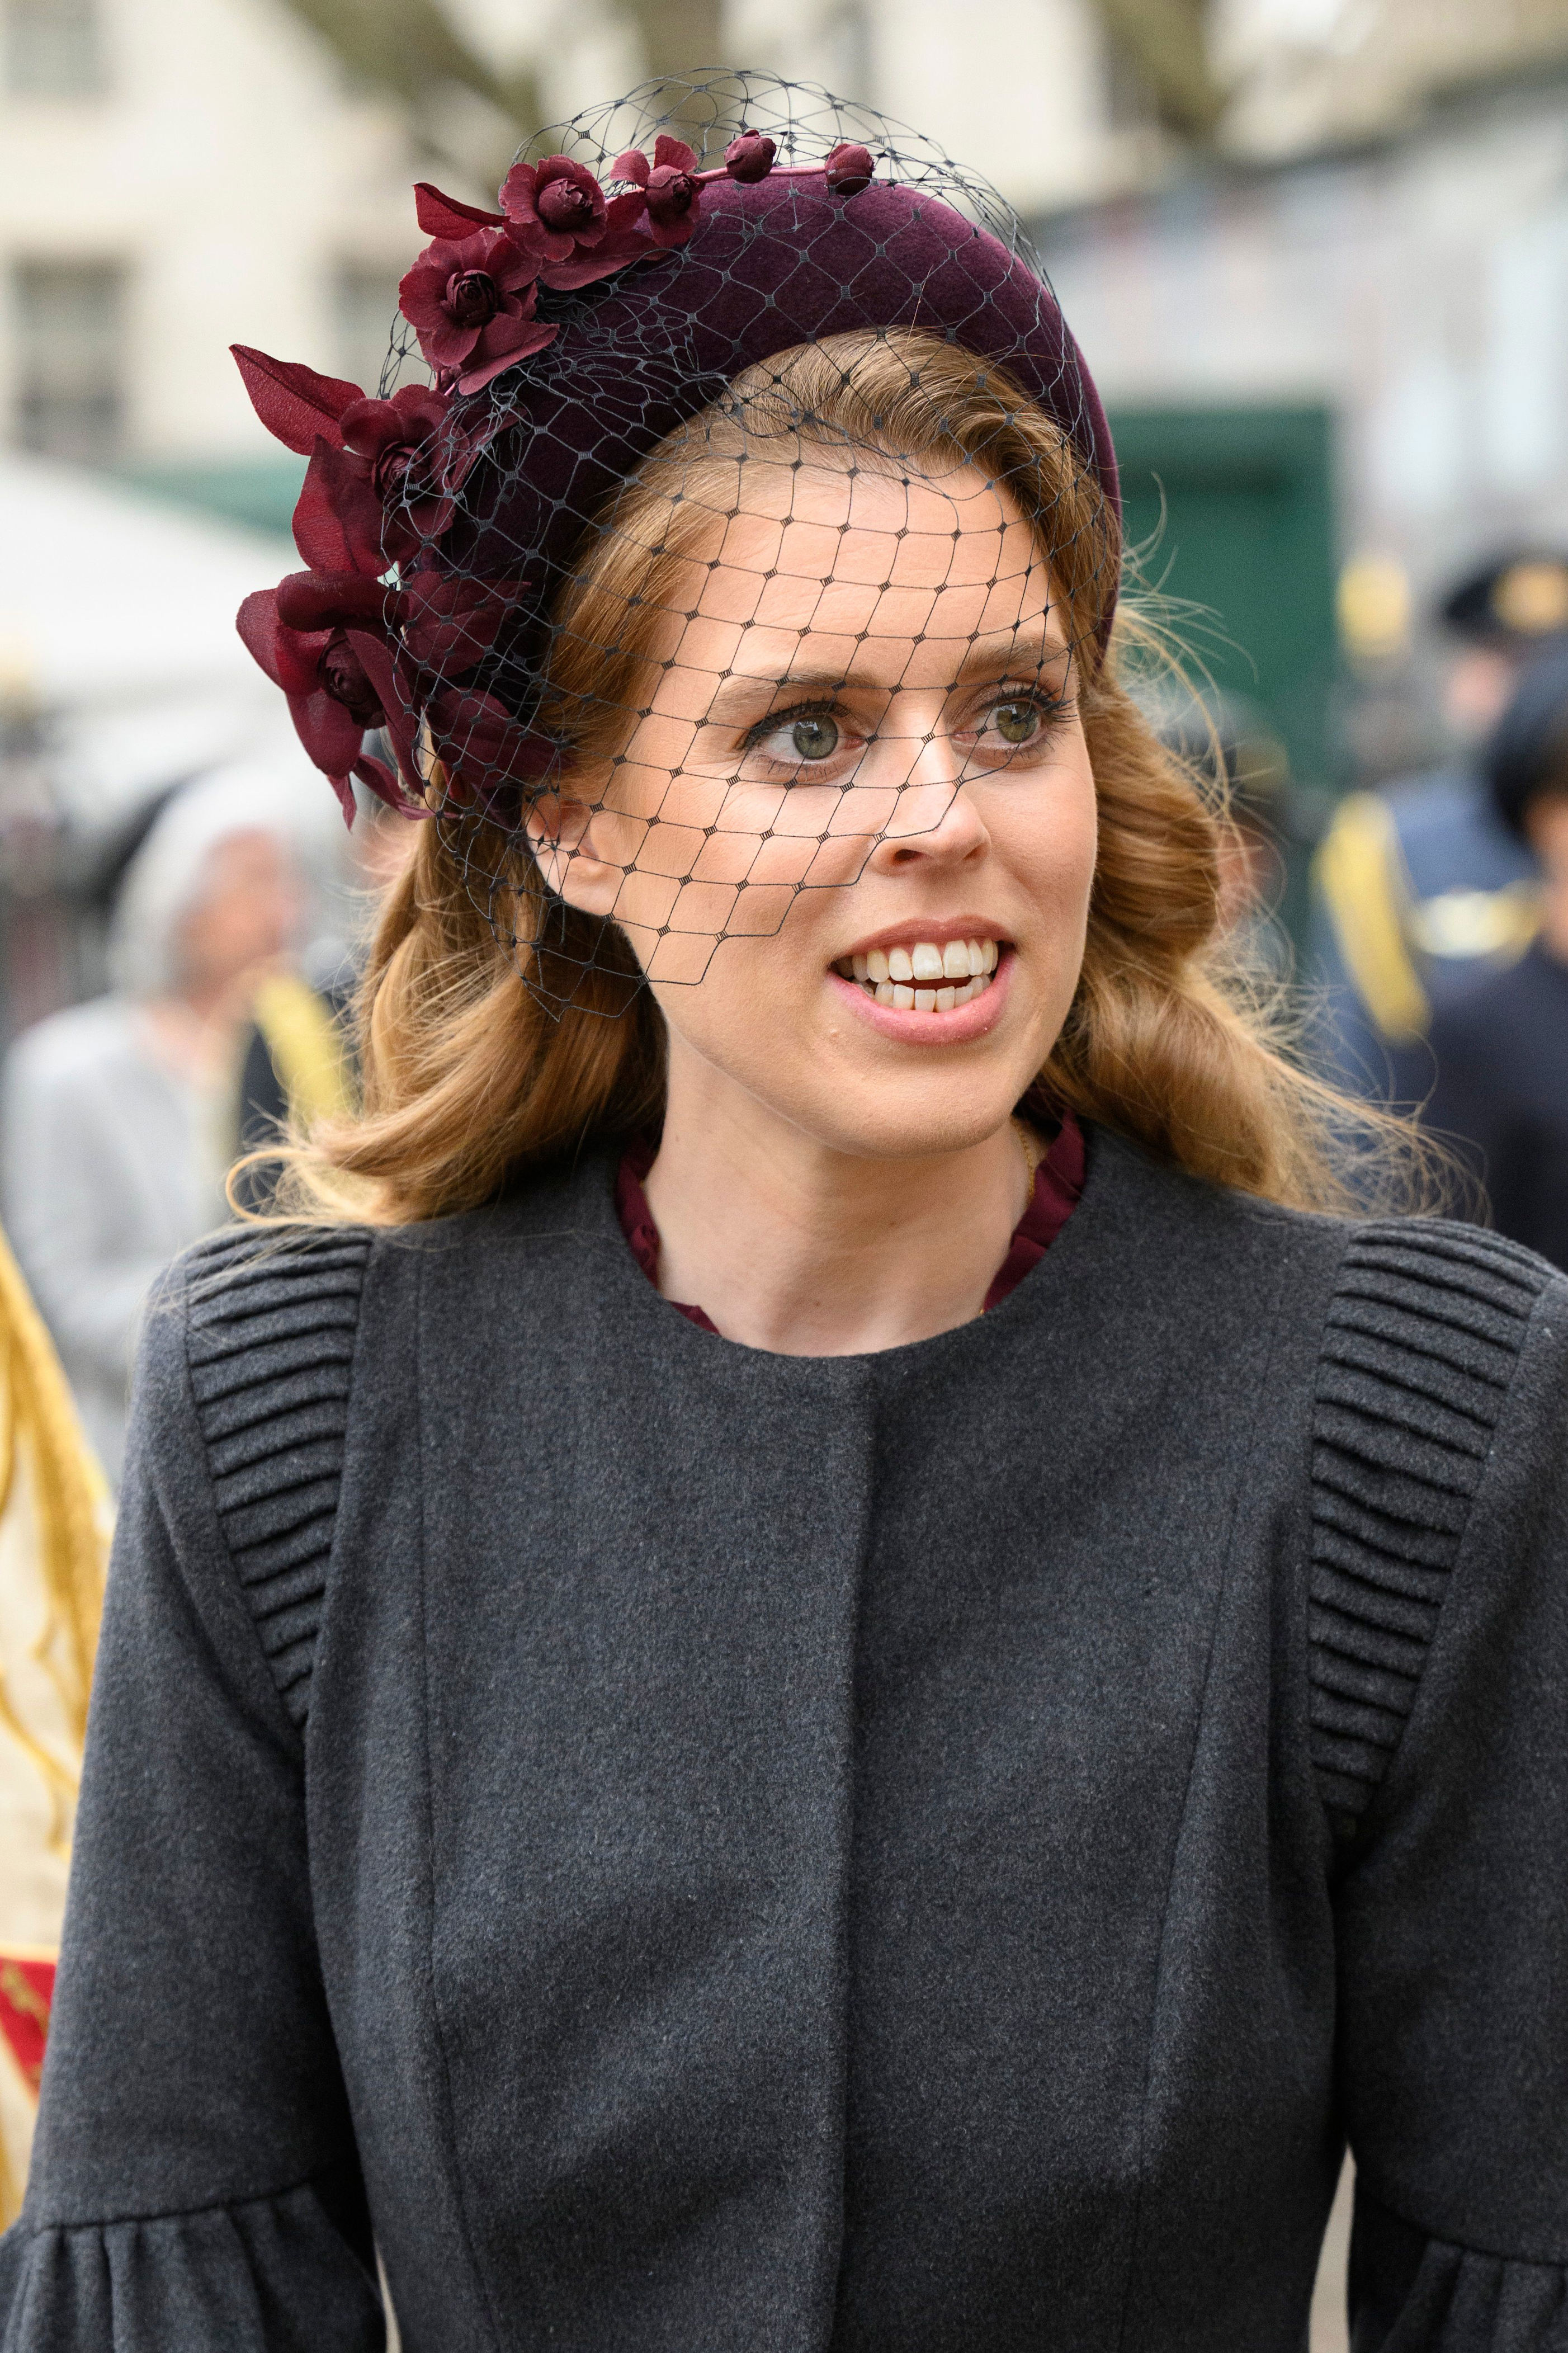 <p>Ninth in line for the throne is Princess Beatrice of York, the daughter of Prince Andrew and ex-wife Sarah, Duchess of York. Before Princess Charlotte's birth in May 2015, Beatrice was the highest ranking female in the royal line of succession. </p>